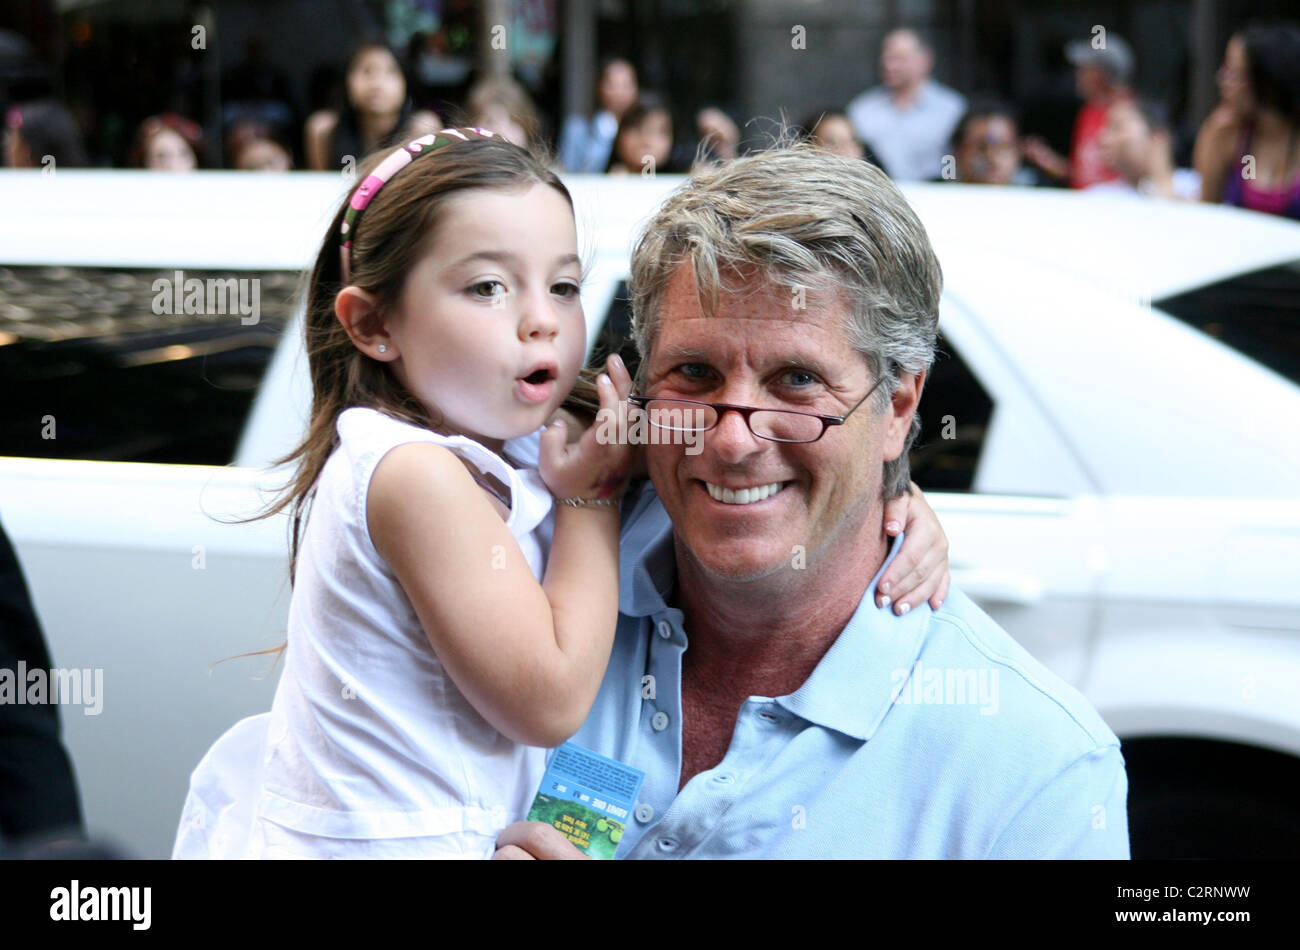 Donny Deutsch and his daughter The New York Premiere of the Disney Channel's 'Camp Rock' held at the Ziegfeld Theatre - Stock Photo